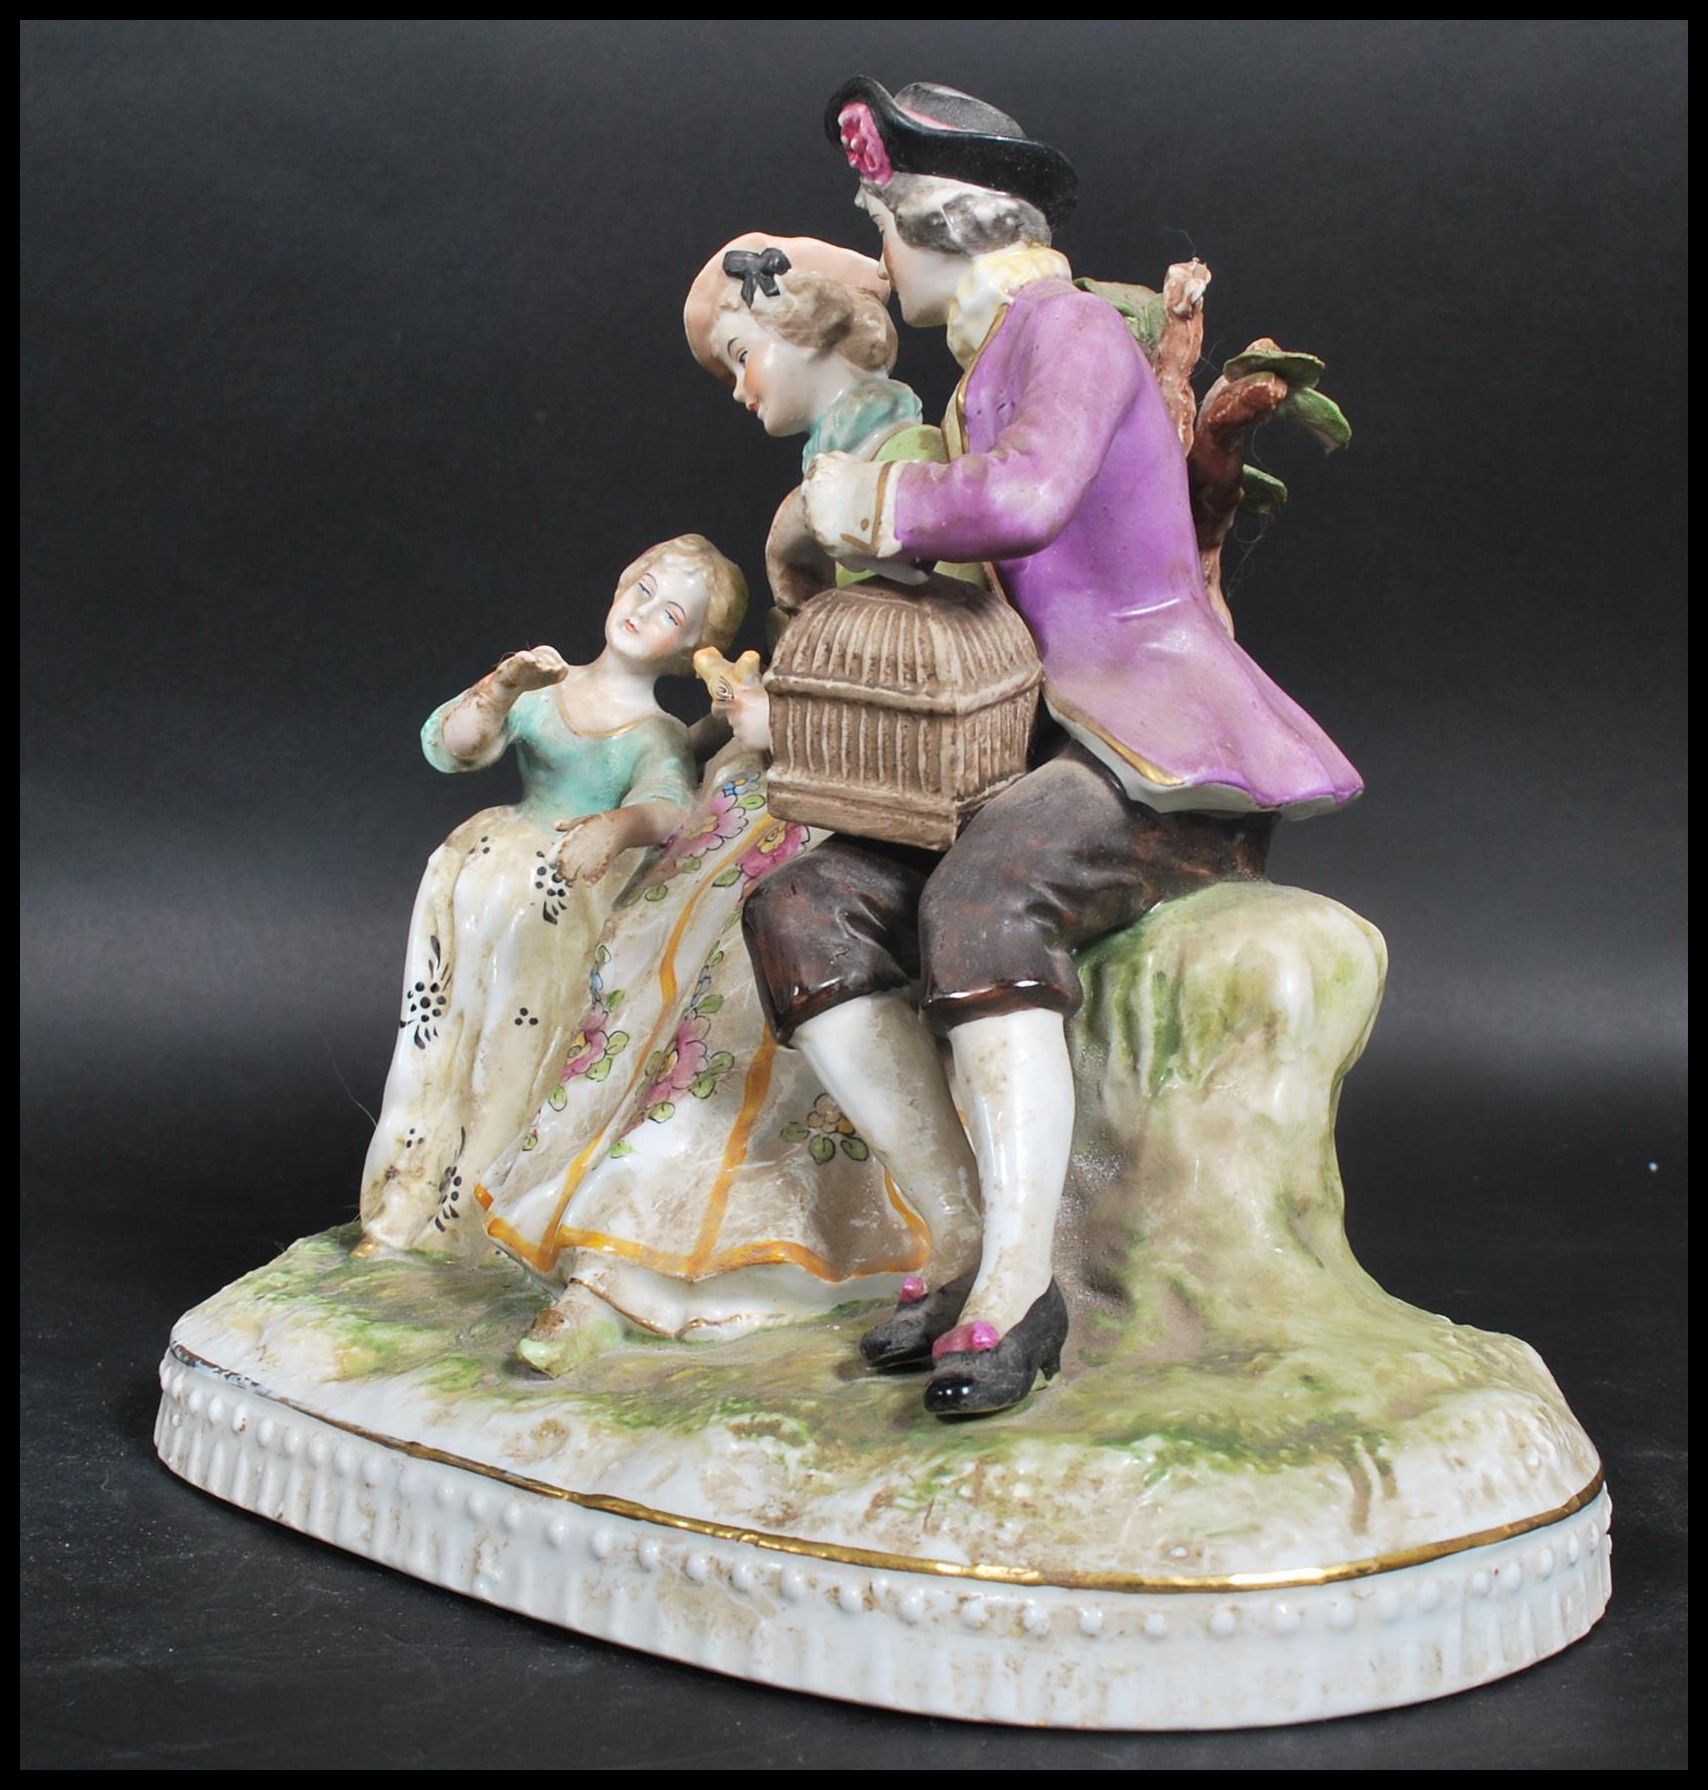 A 19th century Wilhelm Rittirsch German diorama figure group. The figurine depicting a family with - Image 2 of 9